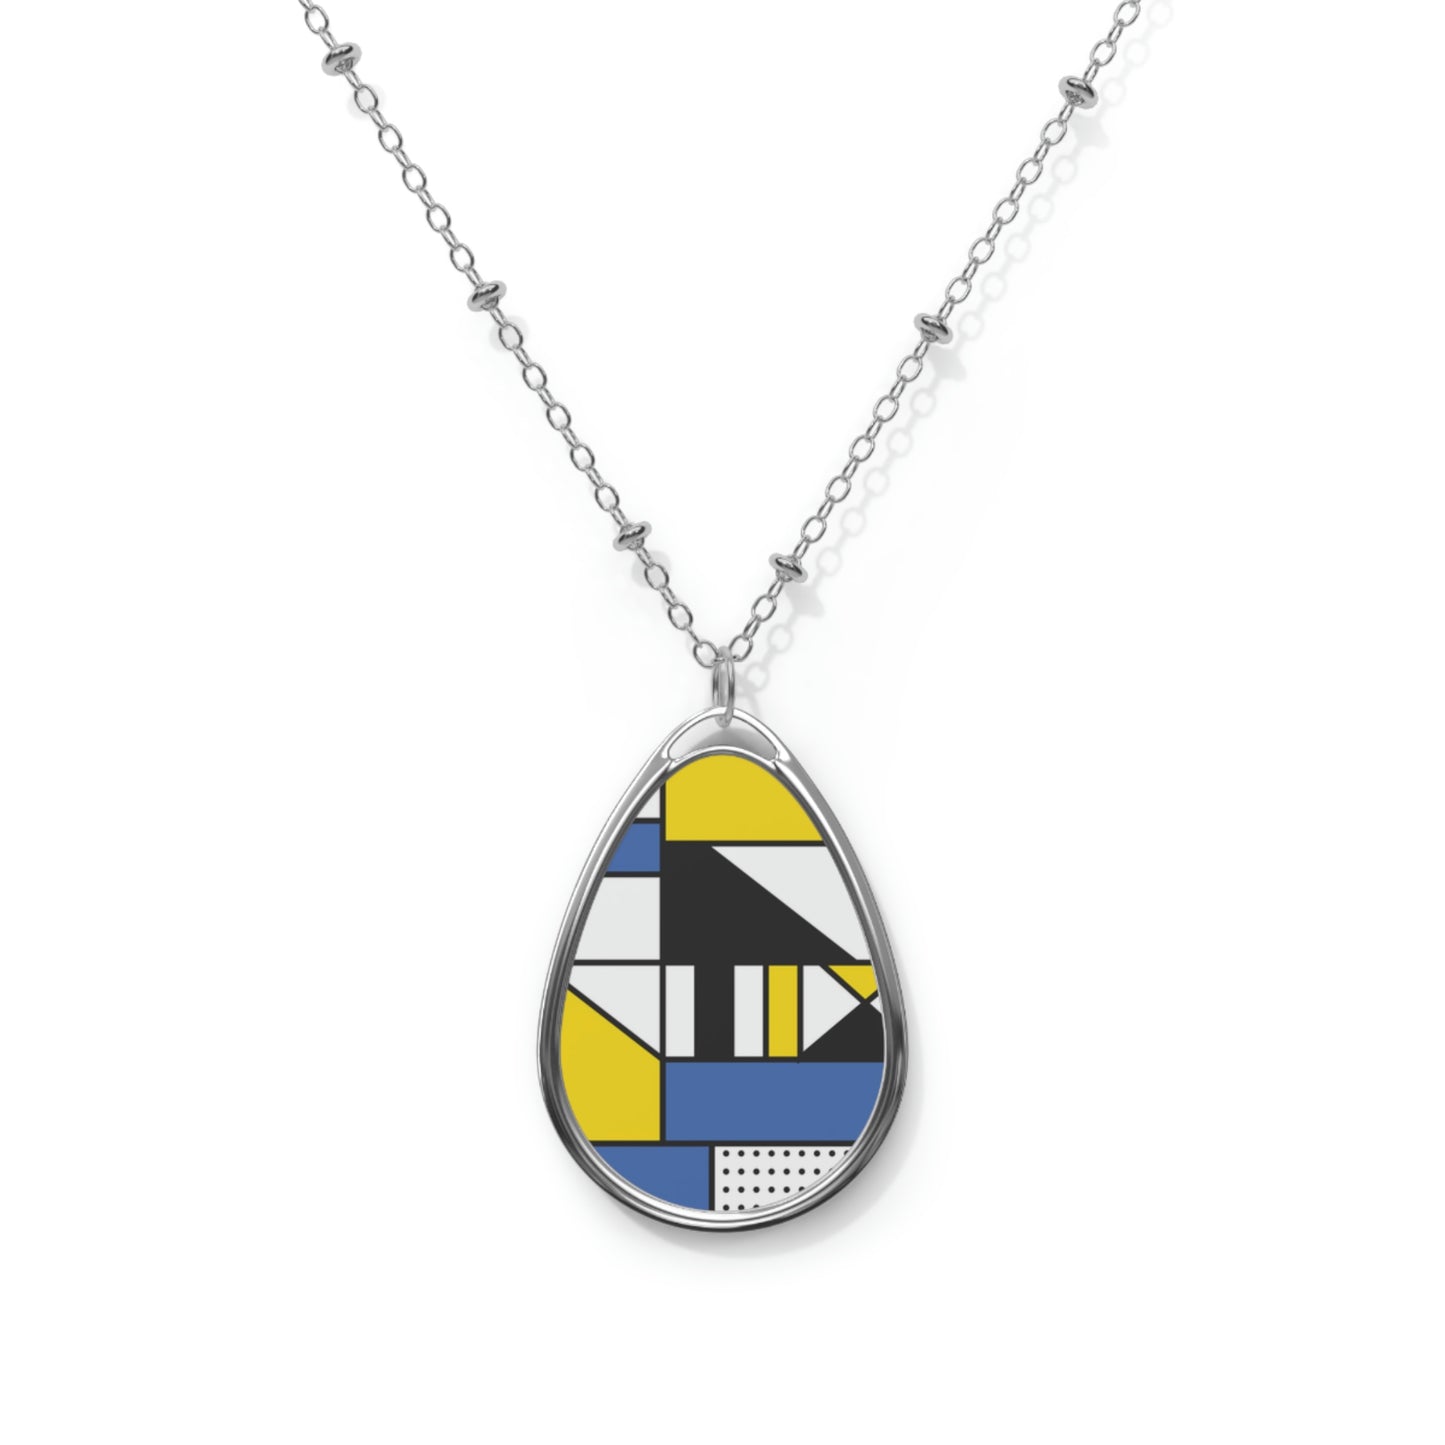 Personalized Jewerly Oval Necklace Piet Mondrian